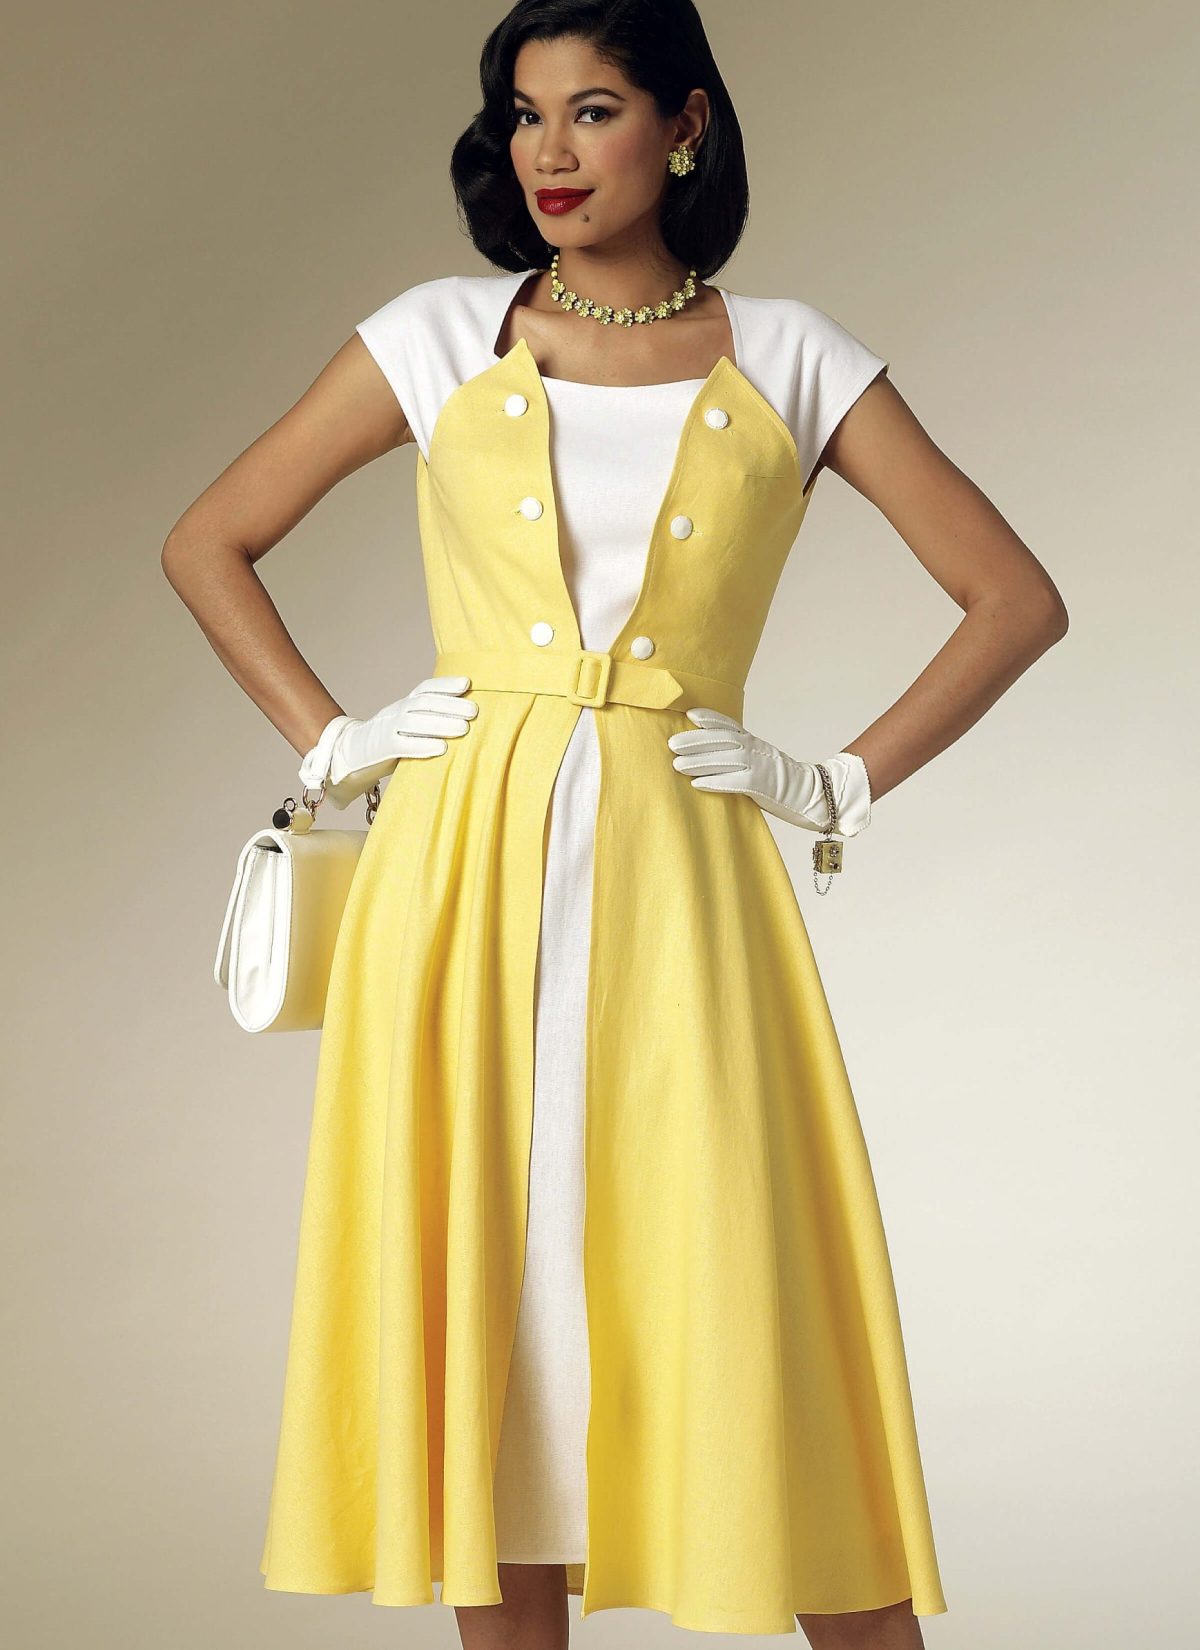 Butterick Sewing Pattern B6211 Misses' Dress and Belt